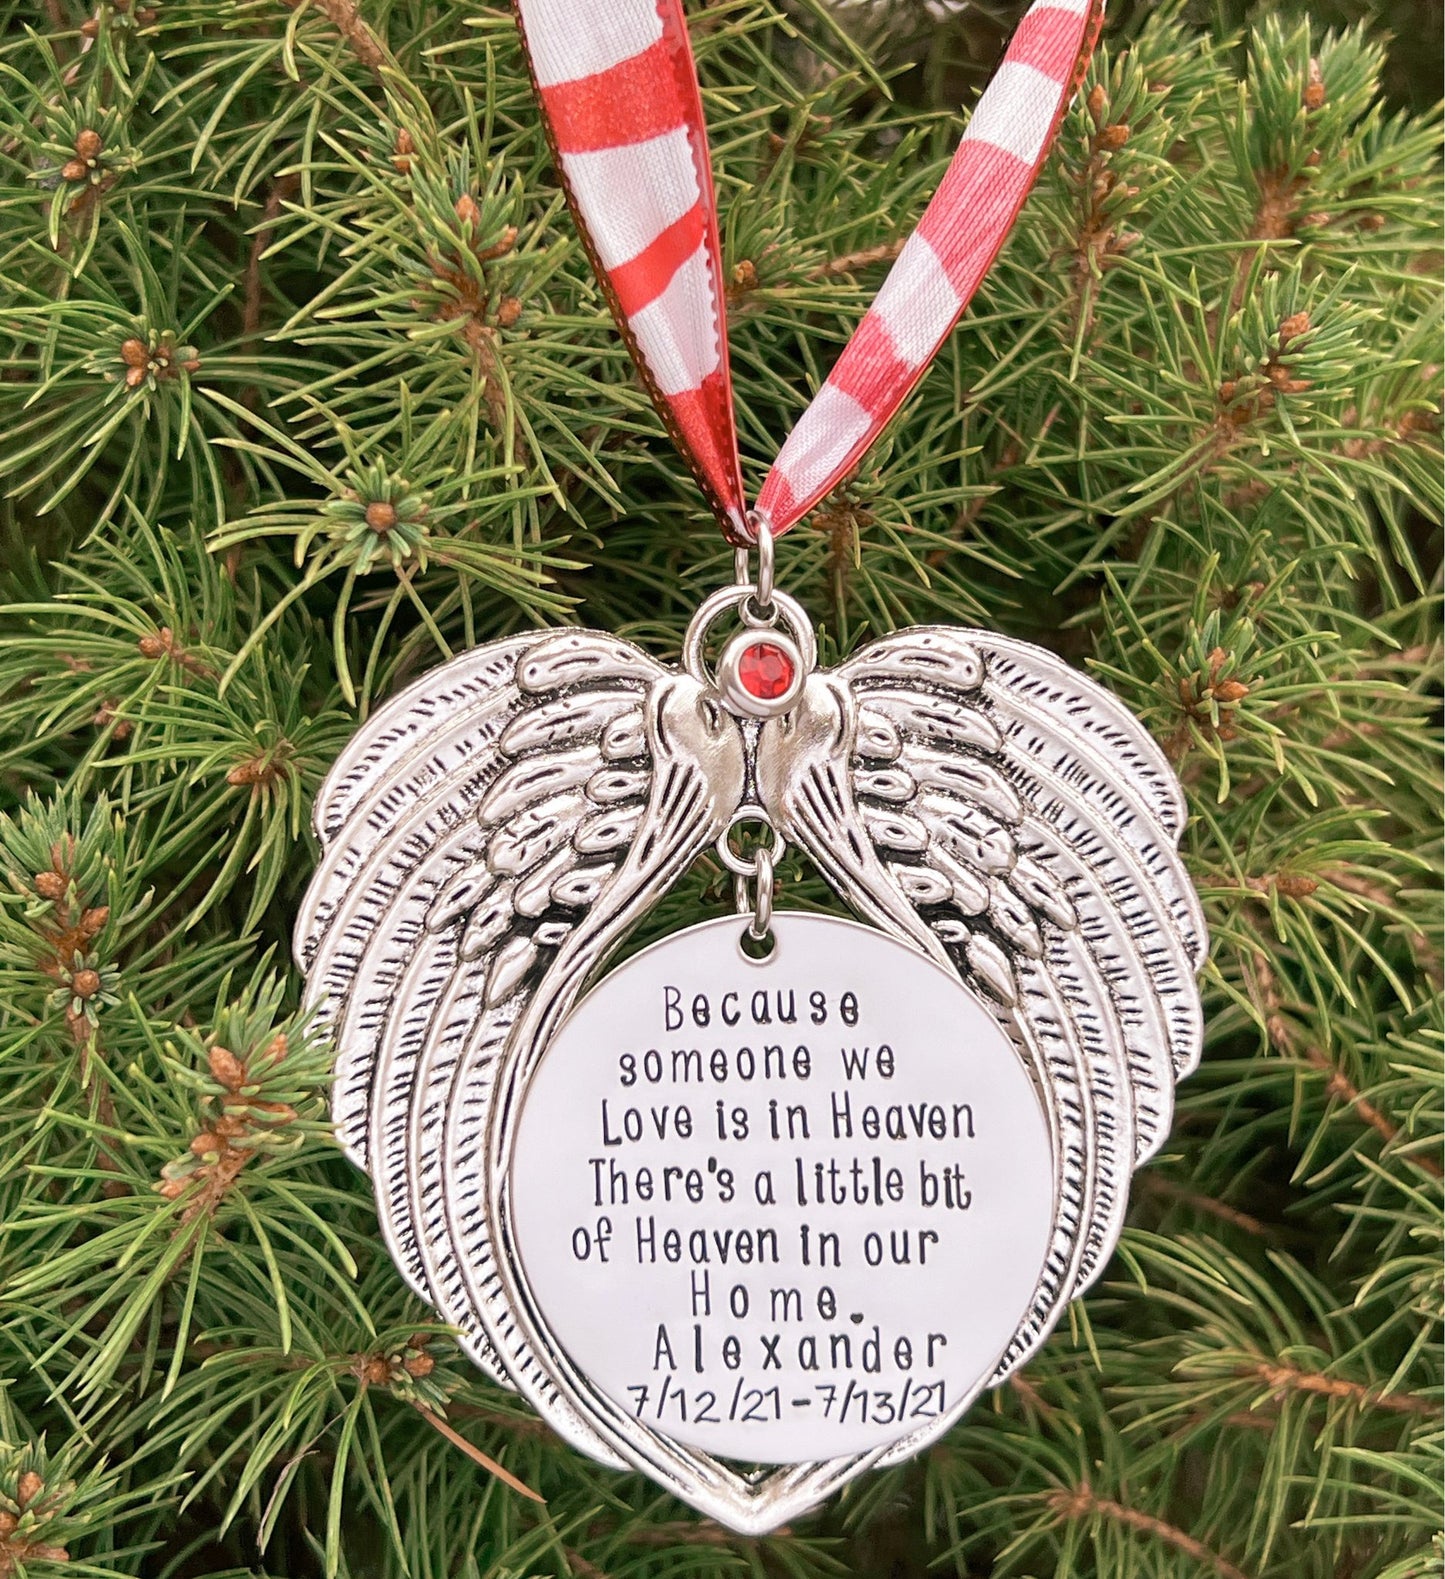 WINGS ORNAMENT WITH DISK